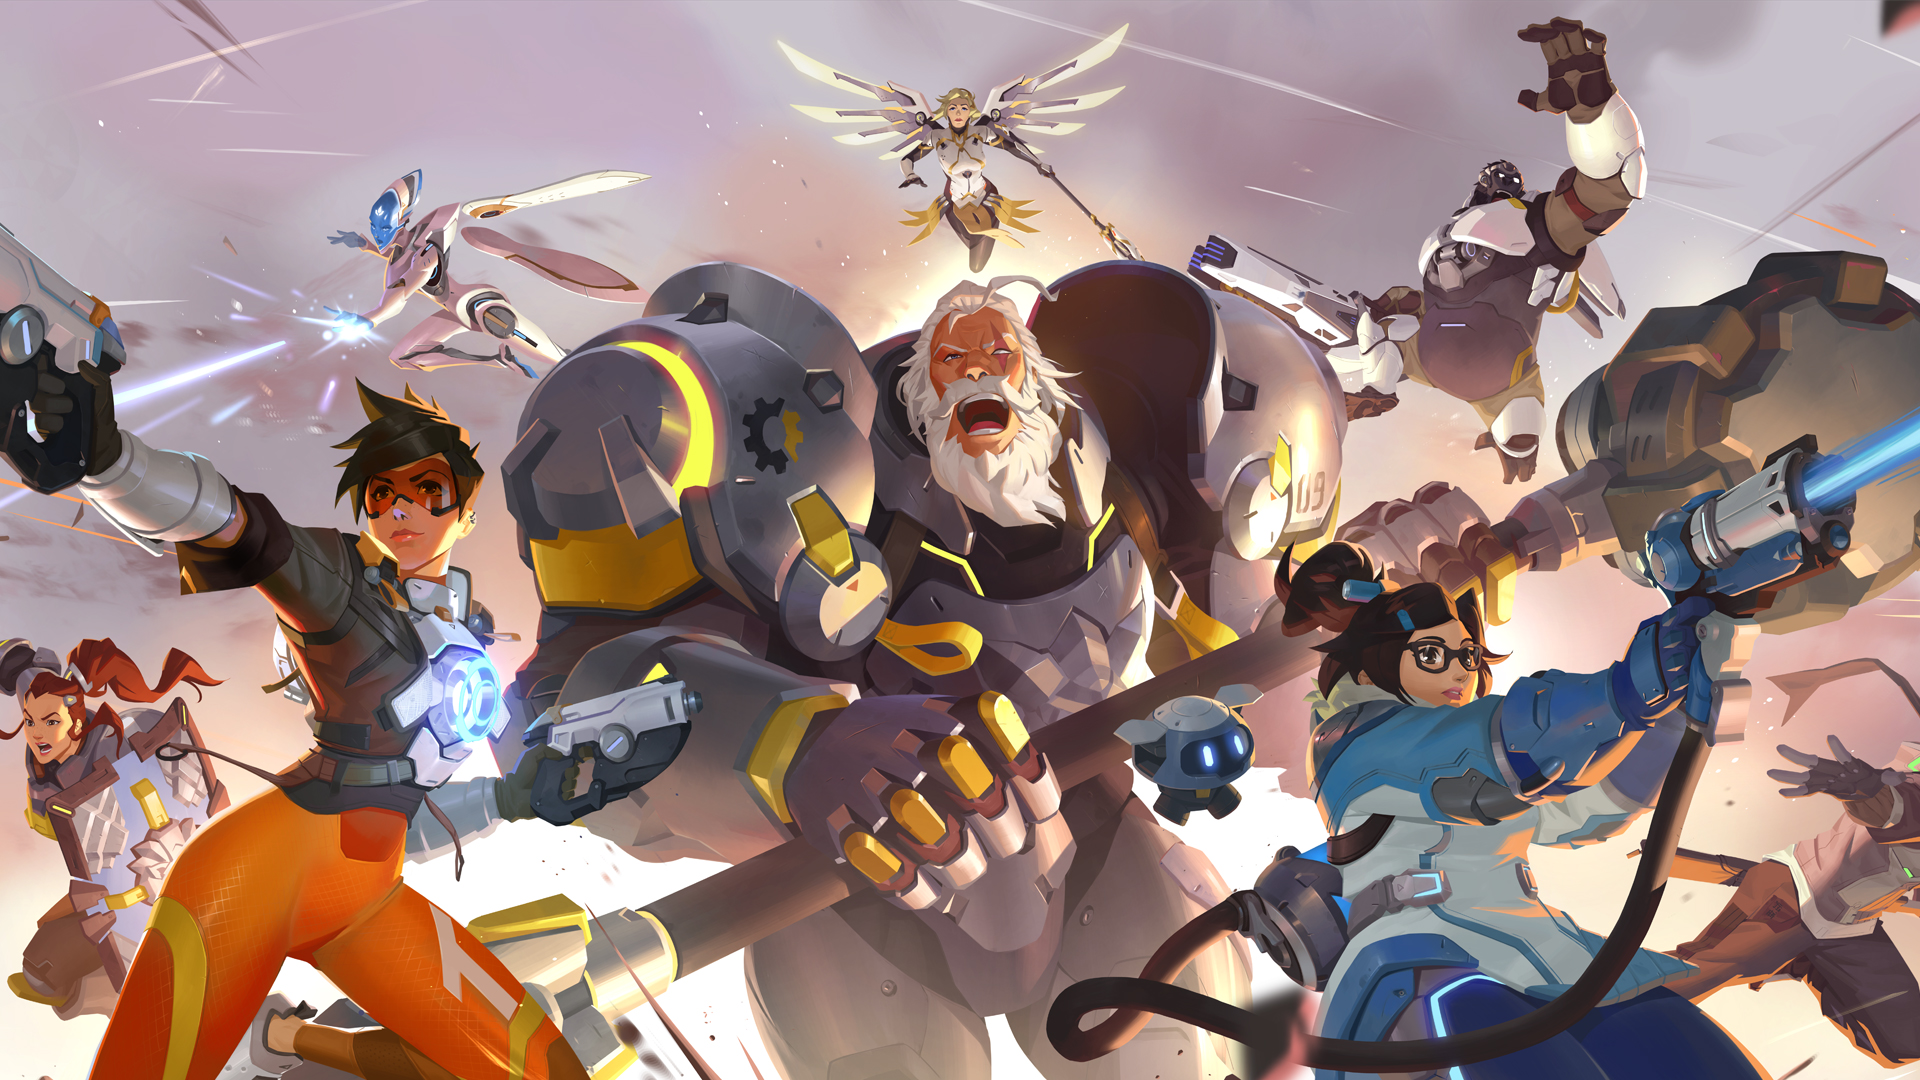 Overwatch 2 new modes, maps, heroes, and everything we know so far